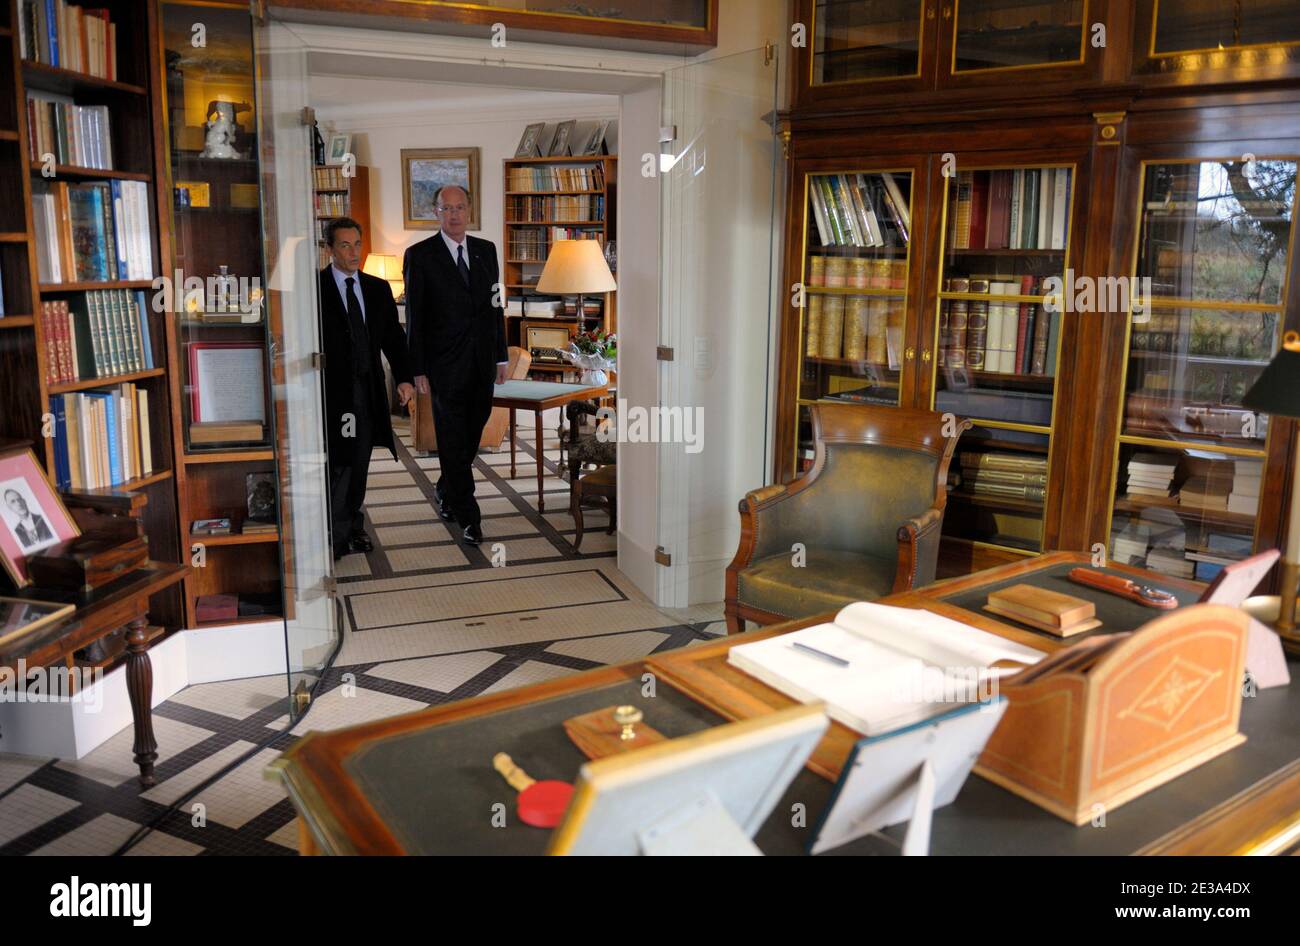 French President Nicolas Sarkozy (L) and Charles de Gaulle's grandson Yves de  Gaulle visit Charles de Gaulle's office in his house 'La Boisserie' during  a ceremony to mark the 40th anniversary of